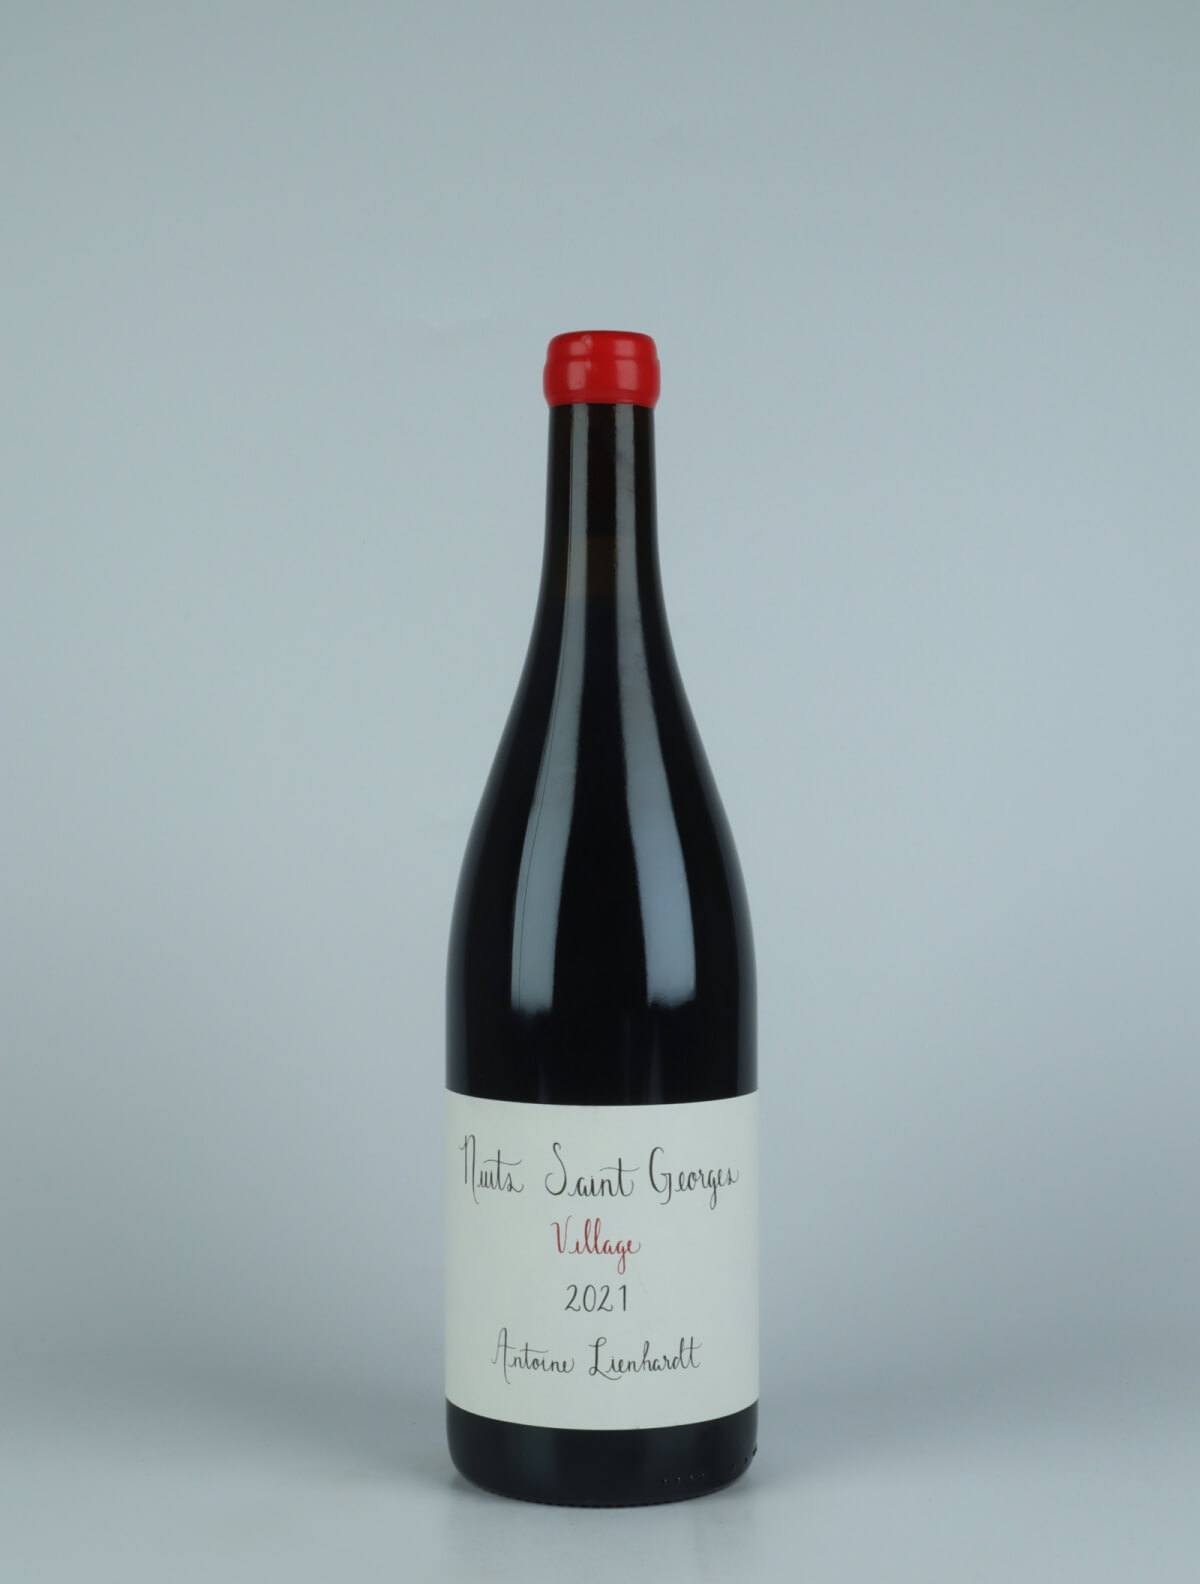 A bottle 2021 Nuits Saint Georges Red wine from Antoine Lienhardt, Burgundy in France